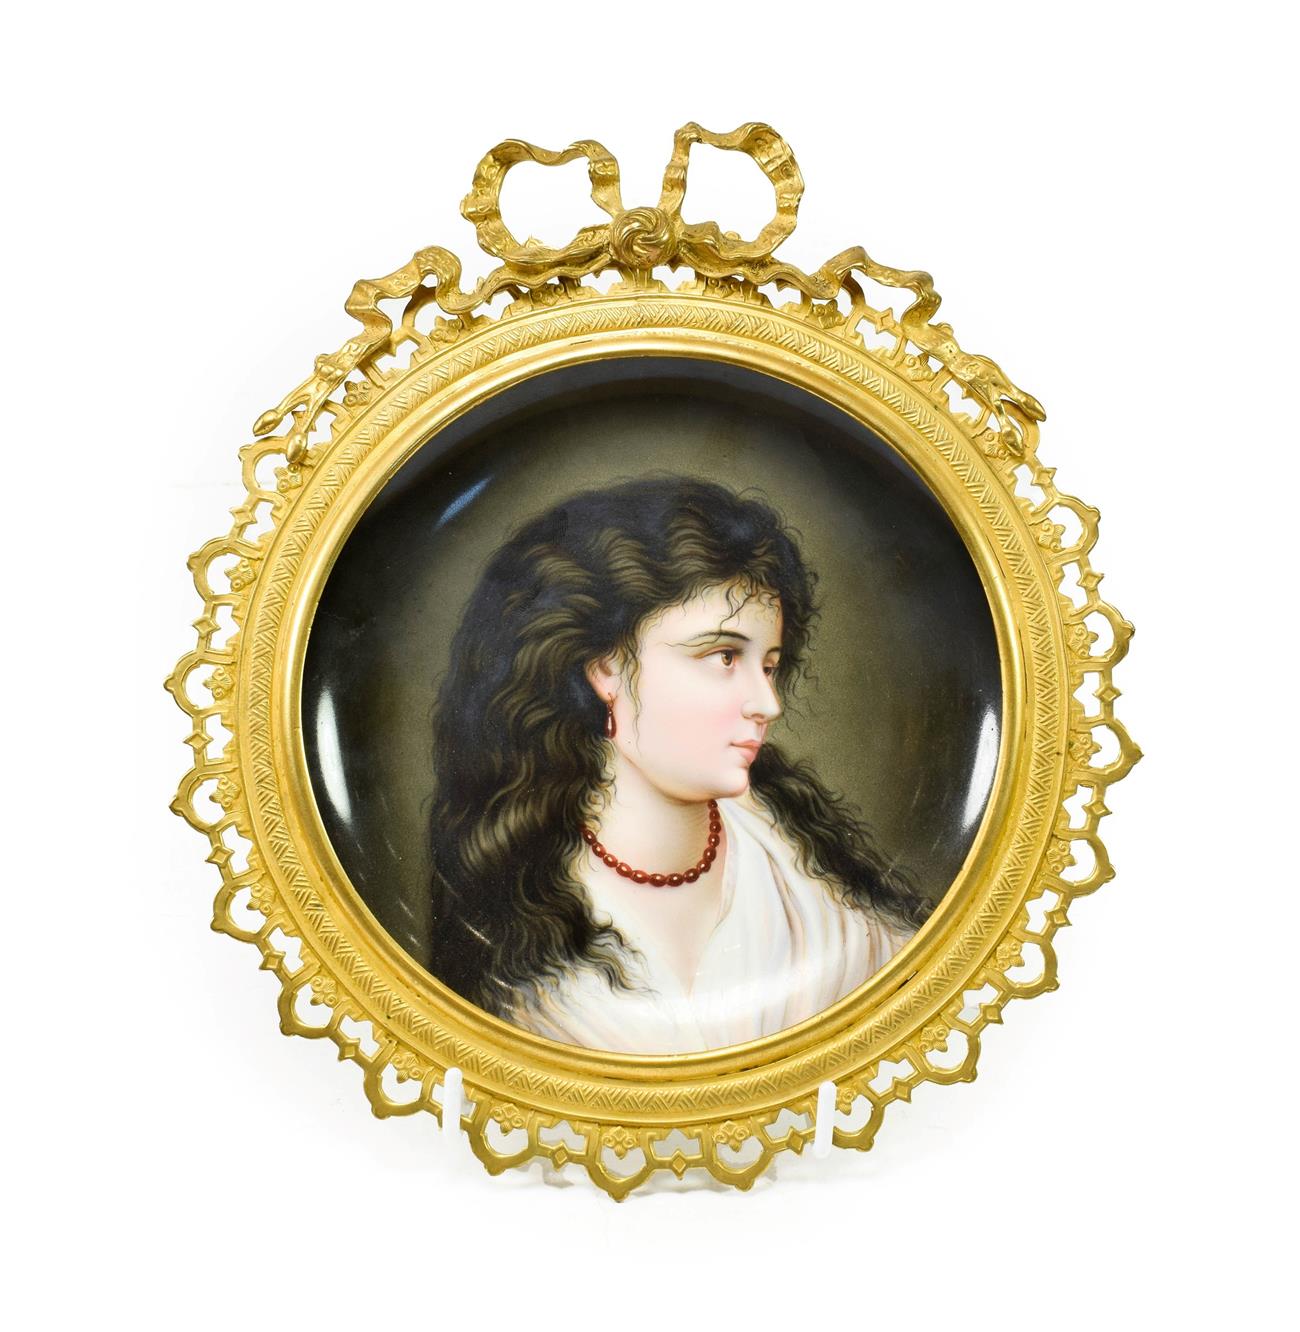 Lot 57 - A Vienna Style Porcelain Saucer Dish, circa 1900, painted with a bust portrait of a girl,...